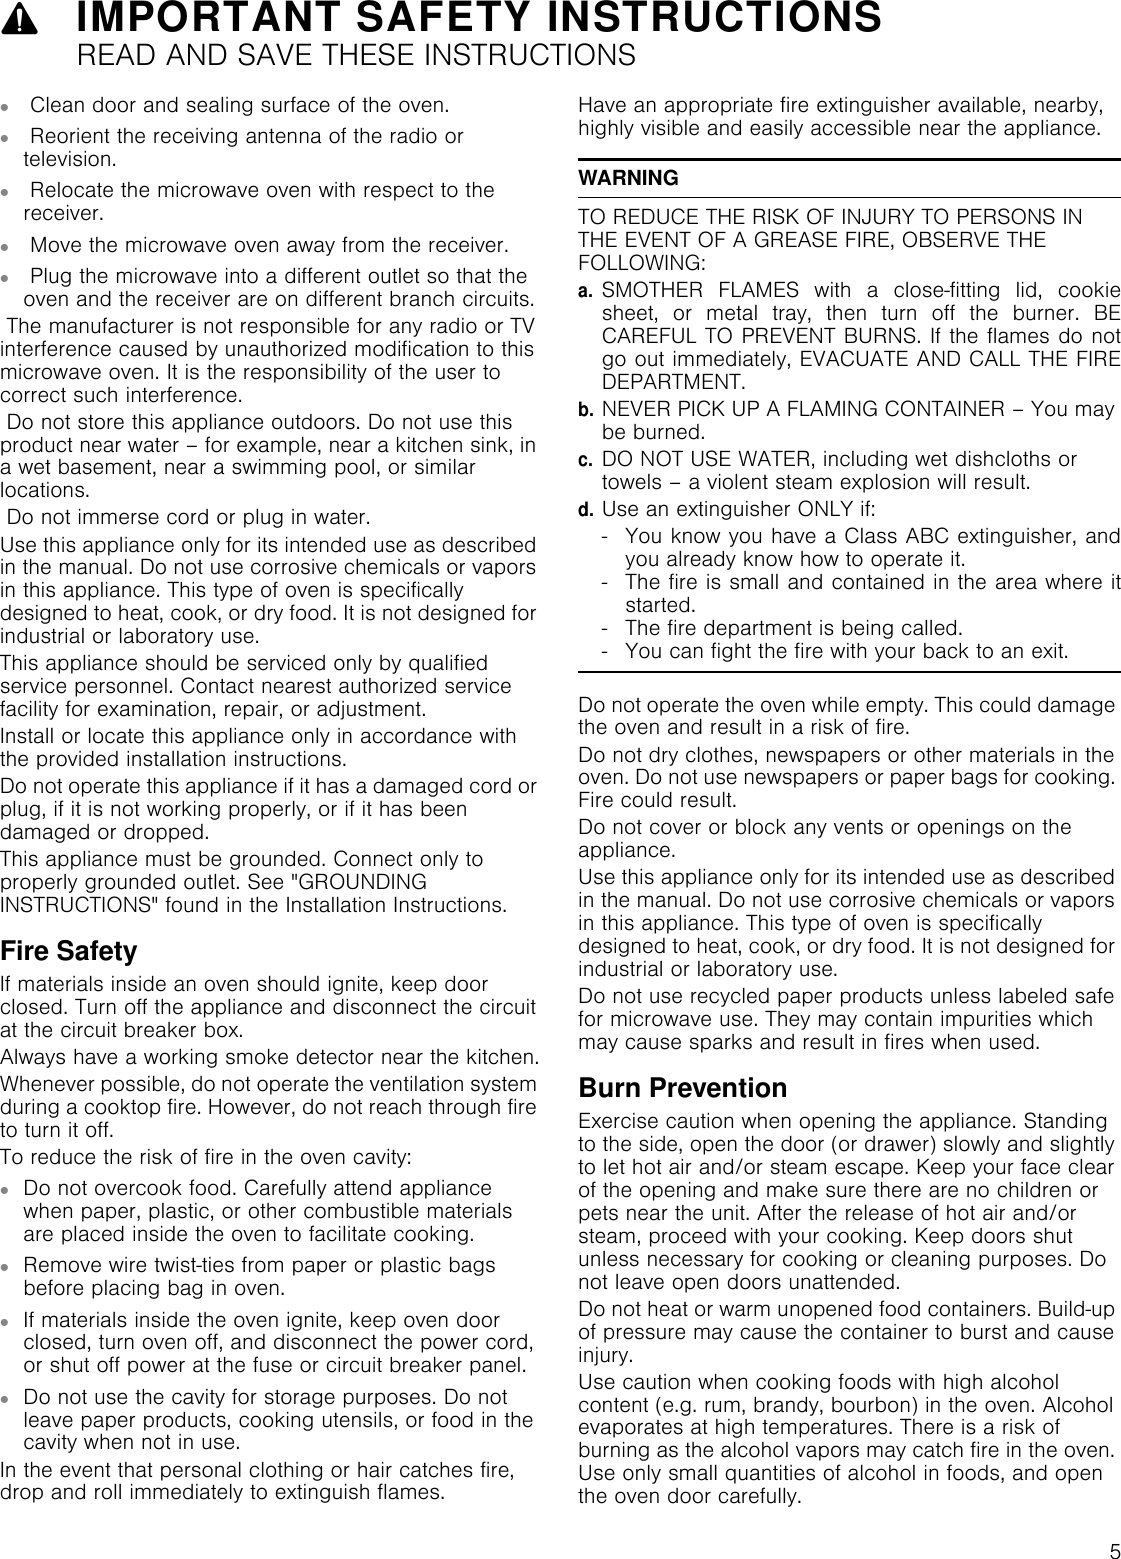 59IMPORTANT SAFETY INSTRUCTIONSREAD AND SAVE THESE INSTRUCTIONS▯ Clean door and sealing surface of the oven.▯ Reorient the receiving antenna of the radio or television.▯ Relocate the microwave oven with respect to the receiver.▯ Move the microwave oven away from the receiver.▯ Plug the microwave into a different outlet so that the oven and the receiver are on different branch circuits. The manufacturer is not responsible for any radio or TV interference caused by unauthorized modification to this microwave oven. It is the responsibility of the user to correct such interference. Do not store this appliance outdoors. Do not use this product near water – for example, near a kitchen sink, in a wet basement, near a swimming pool, or similar locations. Do not immerse cord or plug in water.Use this appliance only for its intended use as described in the manual. Do not use corrosive chemicals or vapors in this appliance. This type of oven is specifically designed to heat, cook, or dry food. It is not designed for industrial or laboratory use.This appliance should be serviced only by qualified service personnel. Contact nearest authorized service facility for examination, repair, or adjustment.Install or locate this appliance only in accordance with the provided installation instructions.Do not operate this appliance if it has a damaged cord or plug, if it is not working properly, or if it has been damaged or dropped.This appliance must be grounded. Connect only to properly grounded outlet. See &quot;GROUNDING INSTRUCTIONS&quot; found in the Installation Instructions.Fire SafetyIf materials inside an oven should ignite, keep door closed. Turn off the appliance and disconnect the circuit at the circuit breaker box.Always have a working smoke detector near the kitchen.Whenever possible, do not operate the ventilation system during a cooktop fire. However, do not reach through fire to turn it off.To reduce the risk of fire in the oven cavity:▯Do not overcook food. Carefully attend appliance when paper, plastic, or other combustible materials are placed inside the oven to facilitate cooking.▯Remove wire twist-ties from paper or plastic bags before placing bag in oven.▯If materials inside the oven ignite, keep oven door closed, turn oven off, and disconnect the power cord, or shut off power at the fuse or circuit breaker panel.▯Do not use the cavity for storage purposes. Do not leave paper products, cooking utensils, or food in the cavity when not in use.In the event that personal clothing or hair catches fire, drop and roll immediately to extinguish flames.Have an appropriate fire extinguisher available, nearby, highly visible and easily accessible near the appliance.WARNINGTO REDUCE THE RISK OF INJURY TO PERSONS IN THE EVENT OF A GREASE FIRE, OBSERVE THE FOLLOWING:a.SMOTHER FLAMES with a close-fitting lid, cookiesheet, or metal tray, then turn off the burner. BECAREFUL TO PREVENT BURNS. If the flames do notgo out immediately, EVACUATE AND CALL THE FIREDEPARTMENT.b.NEVER PICK UP A FLAMING CONTAINER – You may be burned.c.DO NOT USE WATER, including wet dishcloths or towels – a violent steam explosion will result.d.Use an extinguisher ONLY if:- You know you have a Class ABC extinguisher, andyou already know how to operate it.- The fire is small and contained in the area where itstarted.- The fire department is being called.- You can fight the fire with your back to an exit.Do not operate the oven while empty. This could damage the oven and result in a risk of fire.Do not dry clothes, newspapers or other materials in the oven. Do not use newspapers or paper bags for cooking. Fire could result.Do not cover or block any vents or openings on the appliance.Use this appliance only for its intended use as described in the manual. Do not use corrosive chemicals or vapors in this appliance. This type of oven is specifically designed to heat, cook, or dry food. It is not designed for industrial or laboratory use.Do not use recycled paper products unless labeled safe for microwave use. They may contain impurities which may cause sparks and result in fires when used.Burn PreventionExercise caution when opening the appliance. Standing to the side, open the door (or drawer) slowly and slightly to let hot air and/or steam escape. Keep your face clear of the opening and make sure there are no children or pets near the unit. After the release of hot air and/or steam, proceed with your cooking. Keep doors shut unless necessary for cooking or cleaning purposes. Do not leave open doors unattended.Do not heat or warm unopened food containers. Build-up of pressure may cause the container to burst and cause injury.Use caution when cooking foods with high alcohol content (e.g. rum, brandy, bourbon) in the oven. Alcohol evaporates at high temperatures. There is a risk of burning as the alcohol vapors may catch fire in the oven. Use only small quantities of alcohol in foods, and open the oven door carefully.